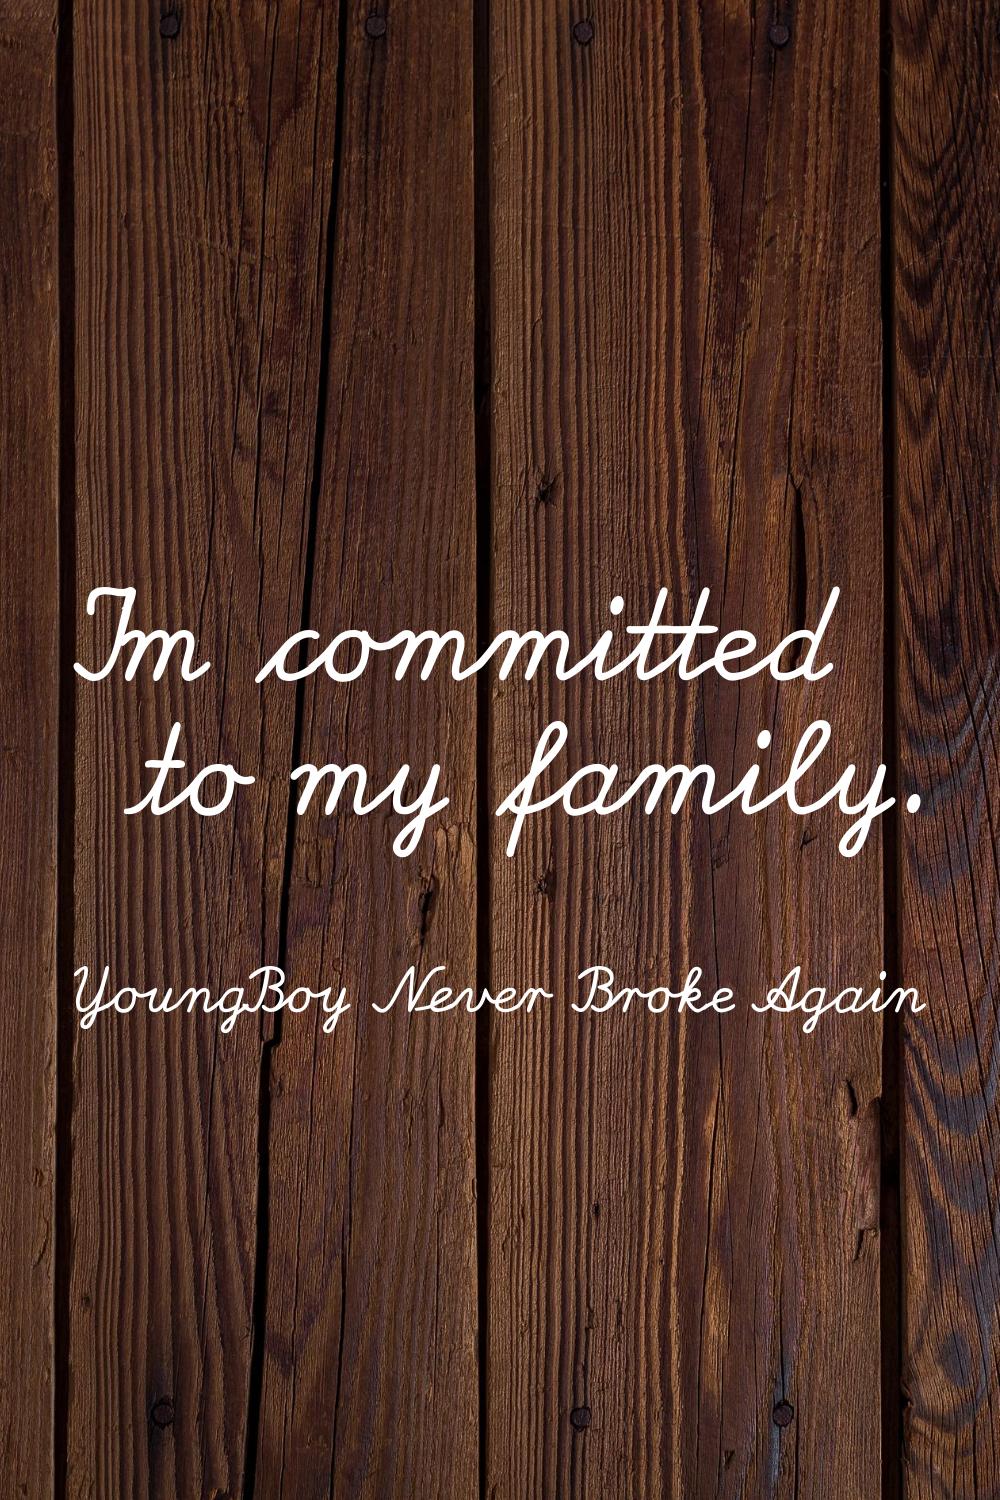 I'm committed to my family.